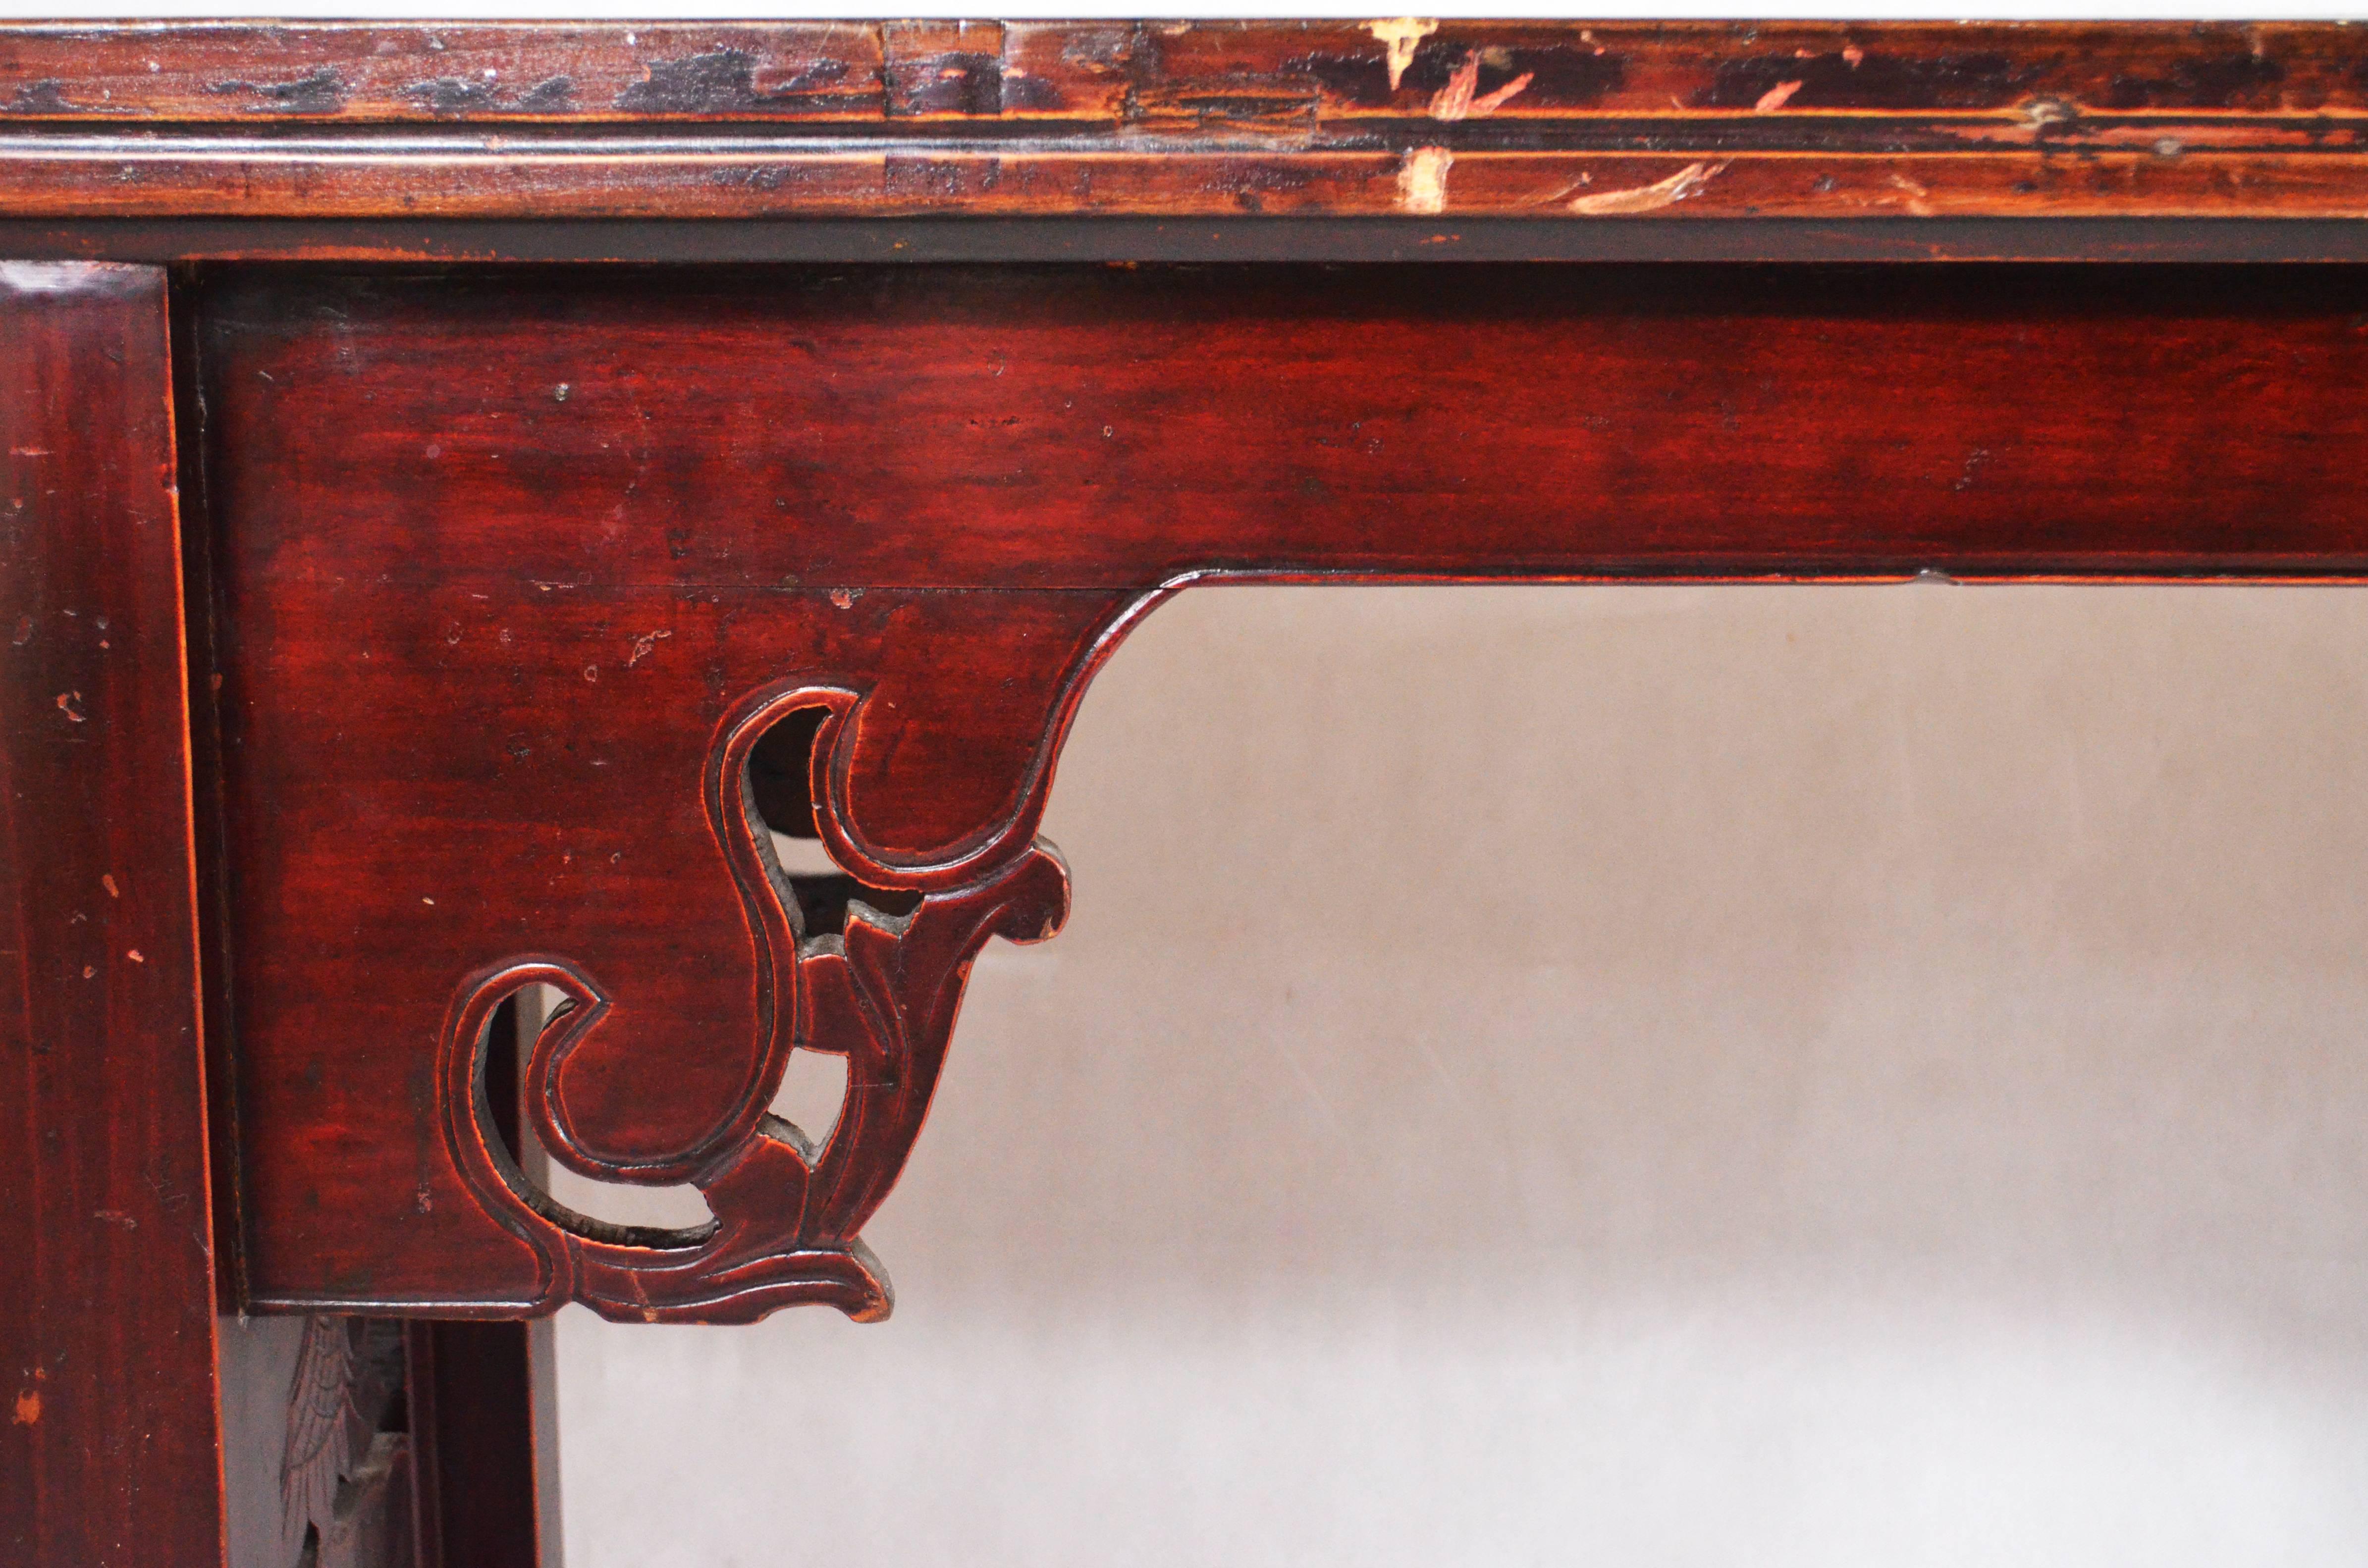 Chinese homu wood console table, from mid-19th century.
It features his original color, a classic Chinese lacquer in dark red that is slightly disappeared on the top and on the legs, showing the natural grain of homu.
The table is finished and